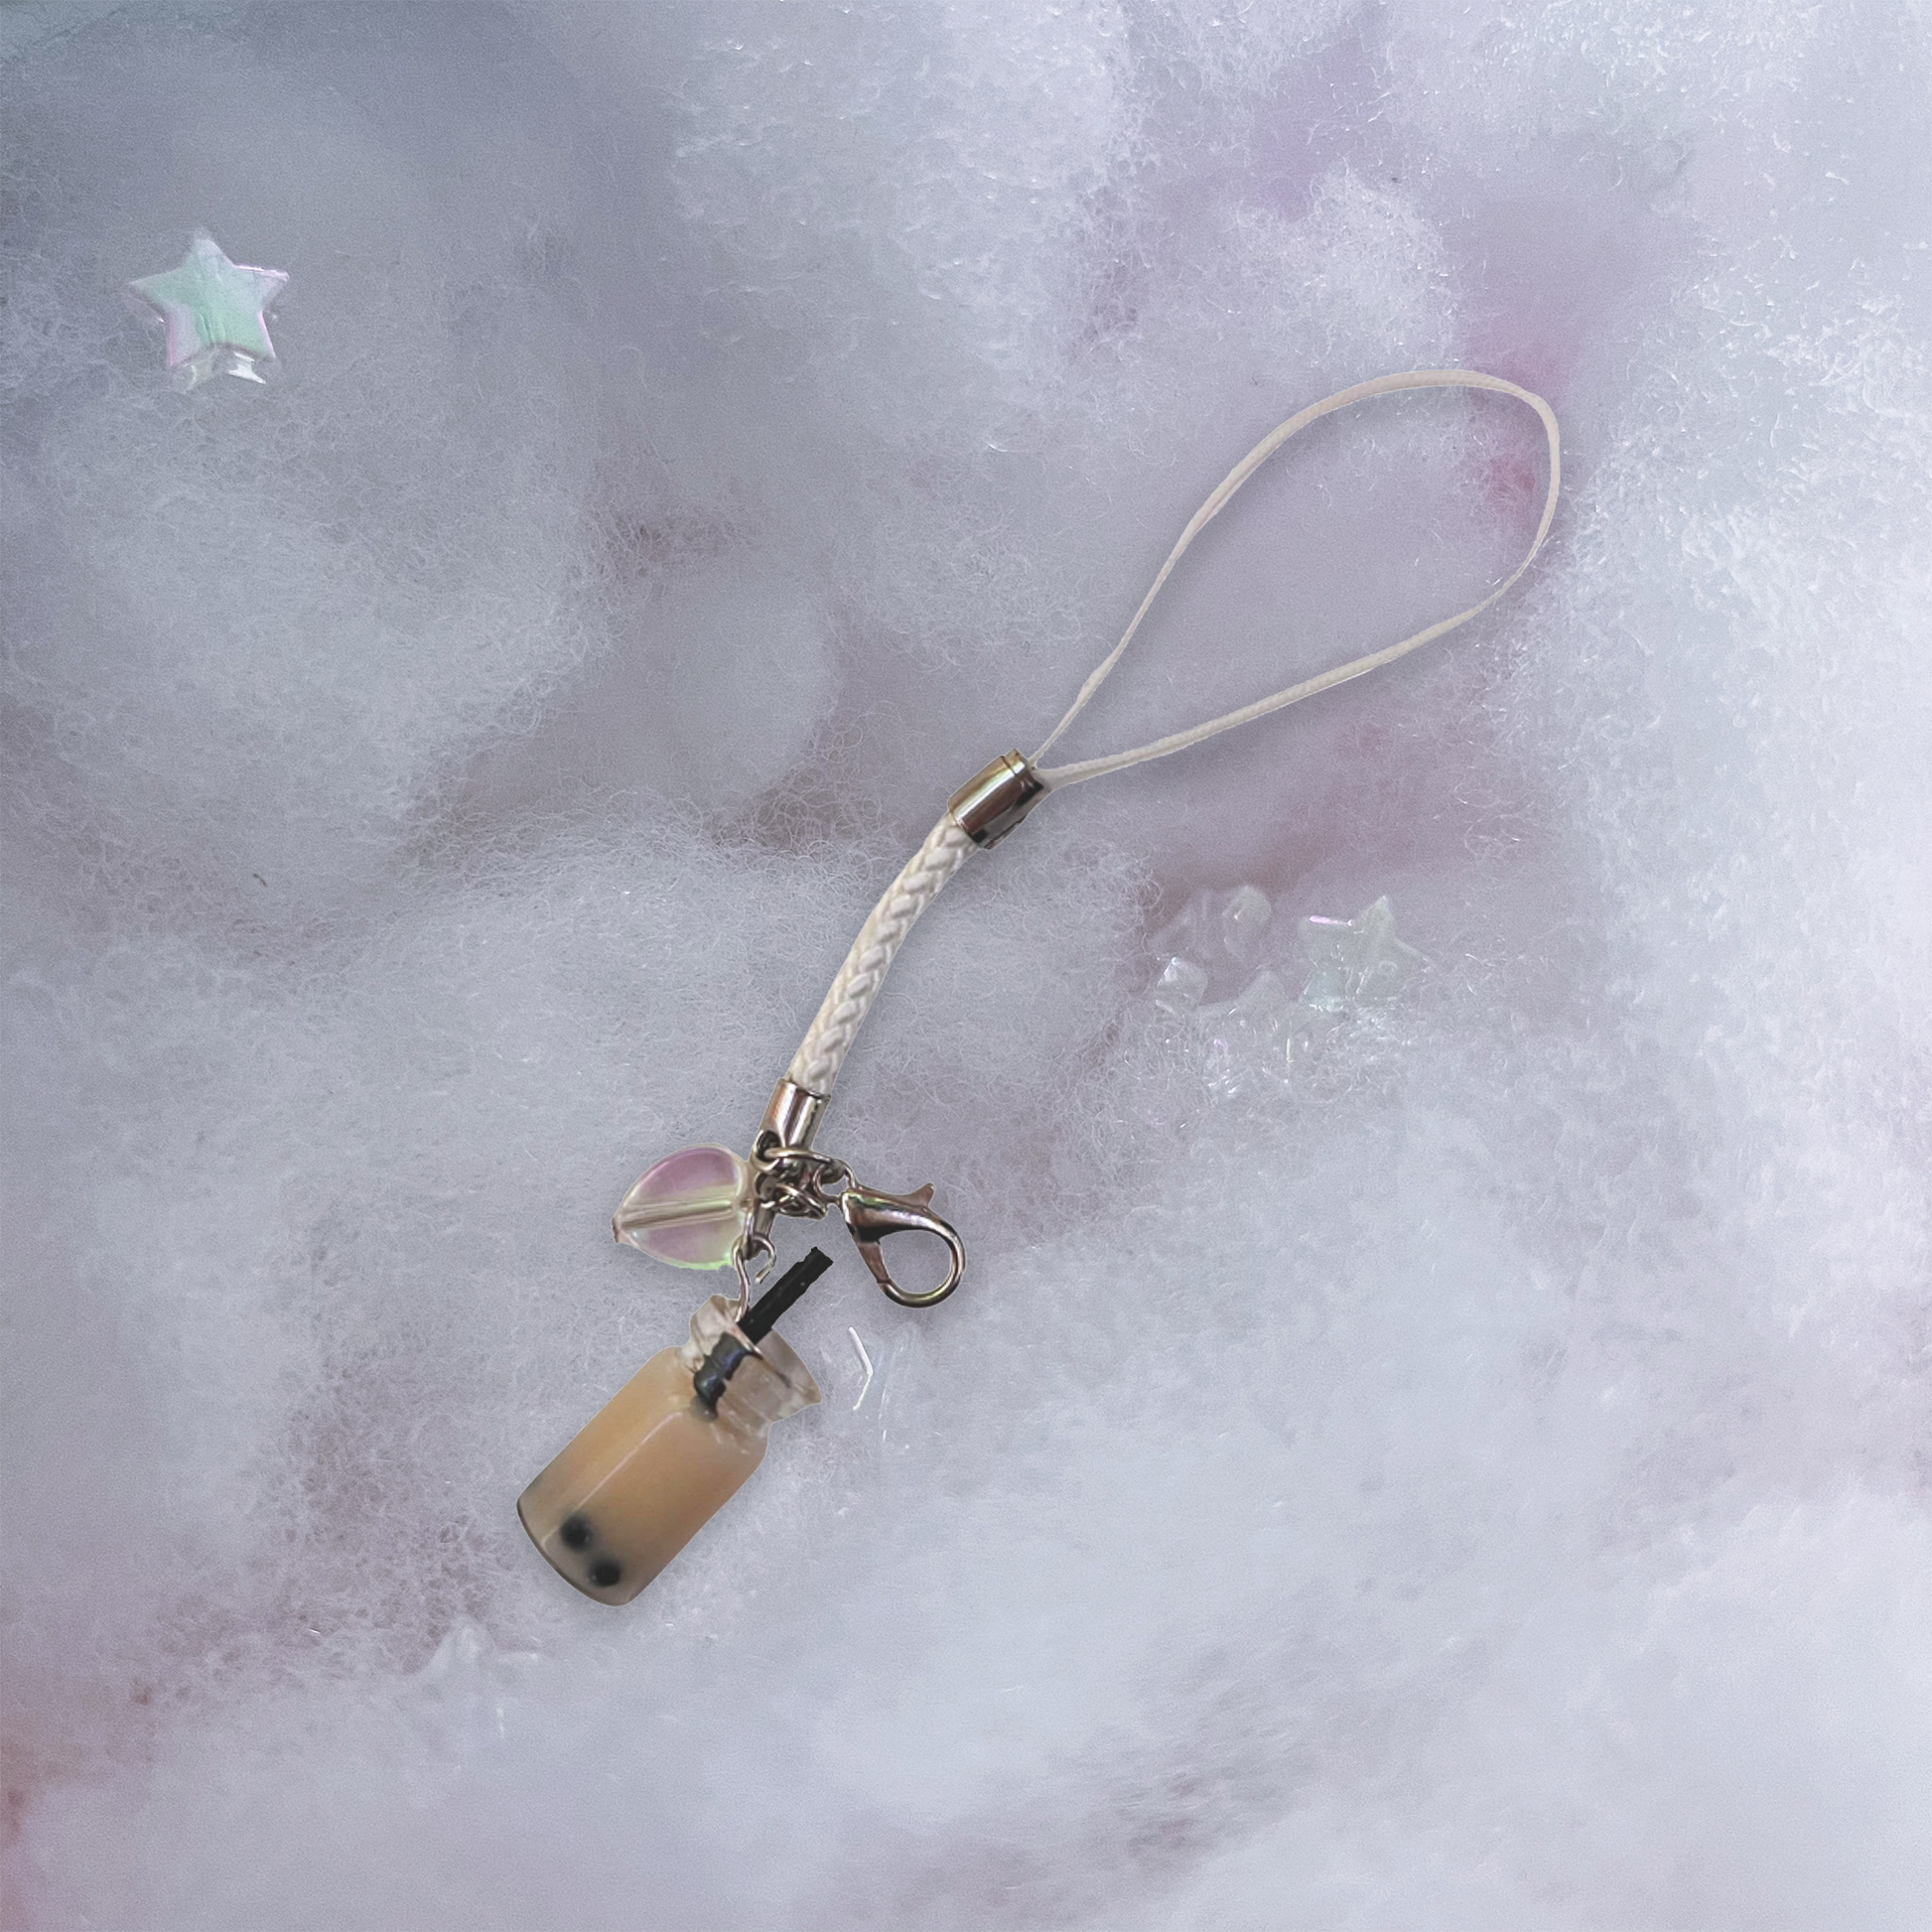 White boba charm with holographic heart charm and white braided phone strap.